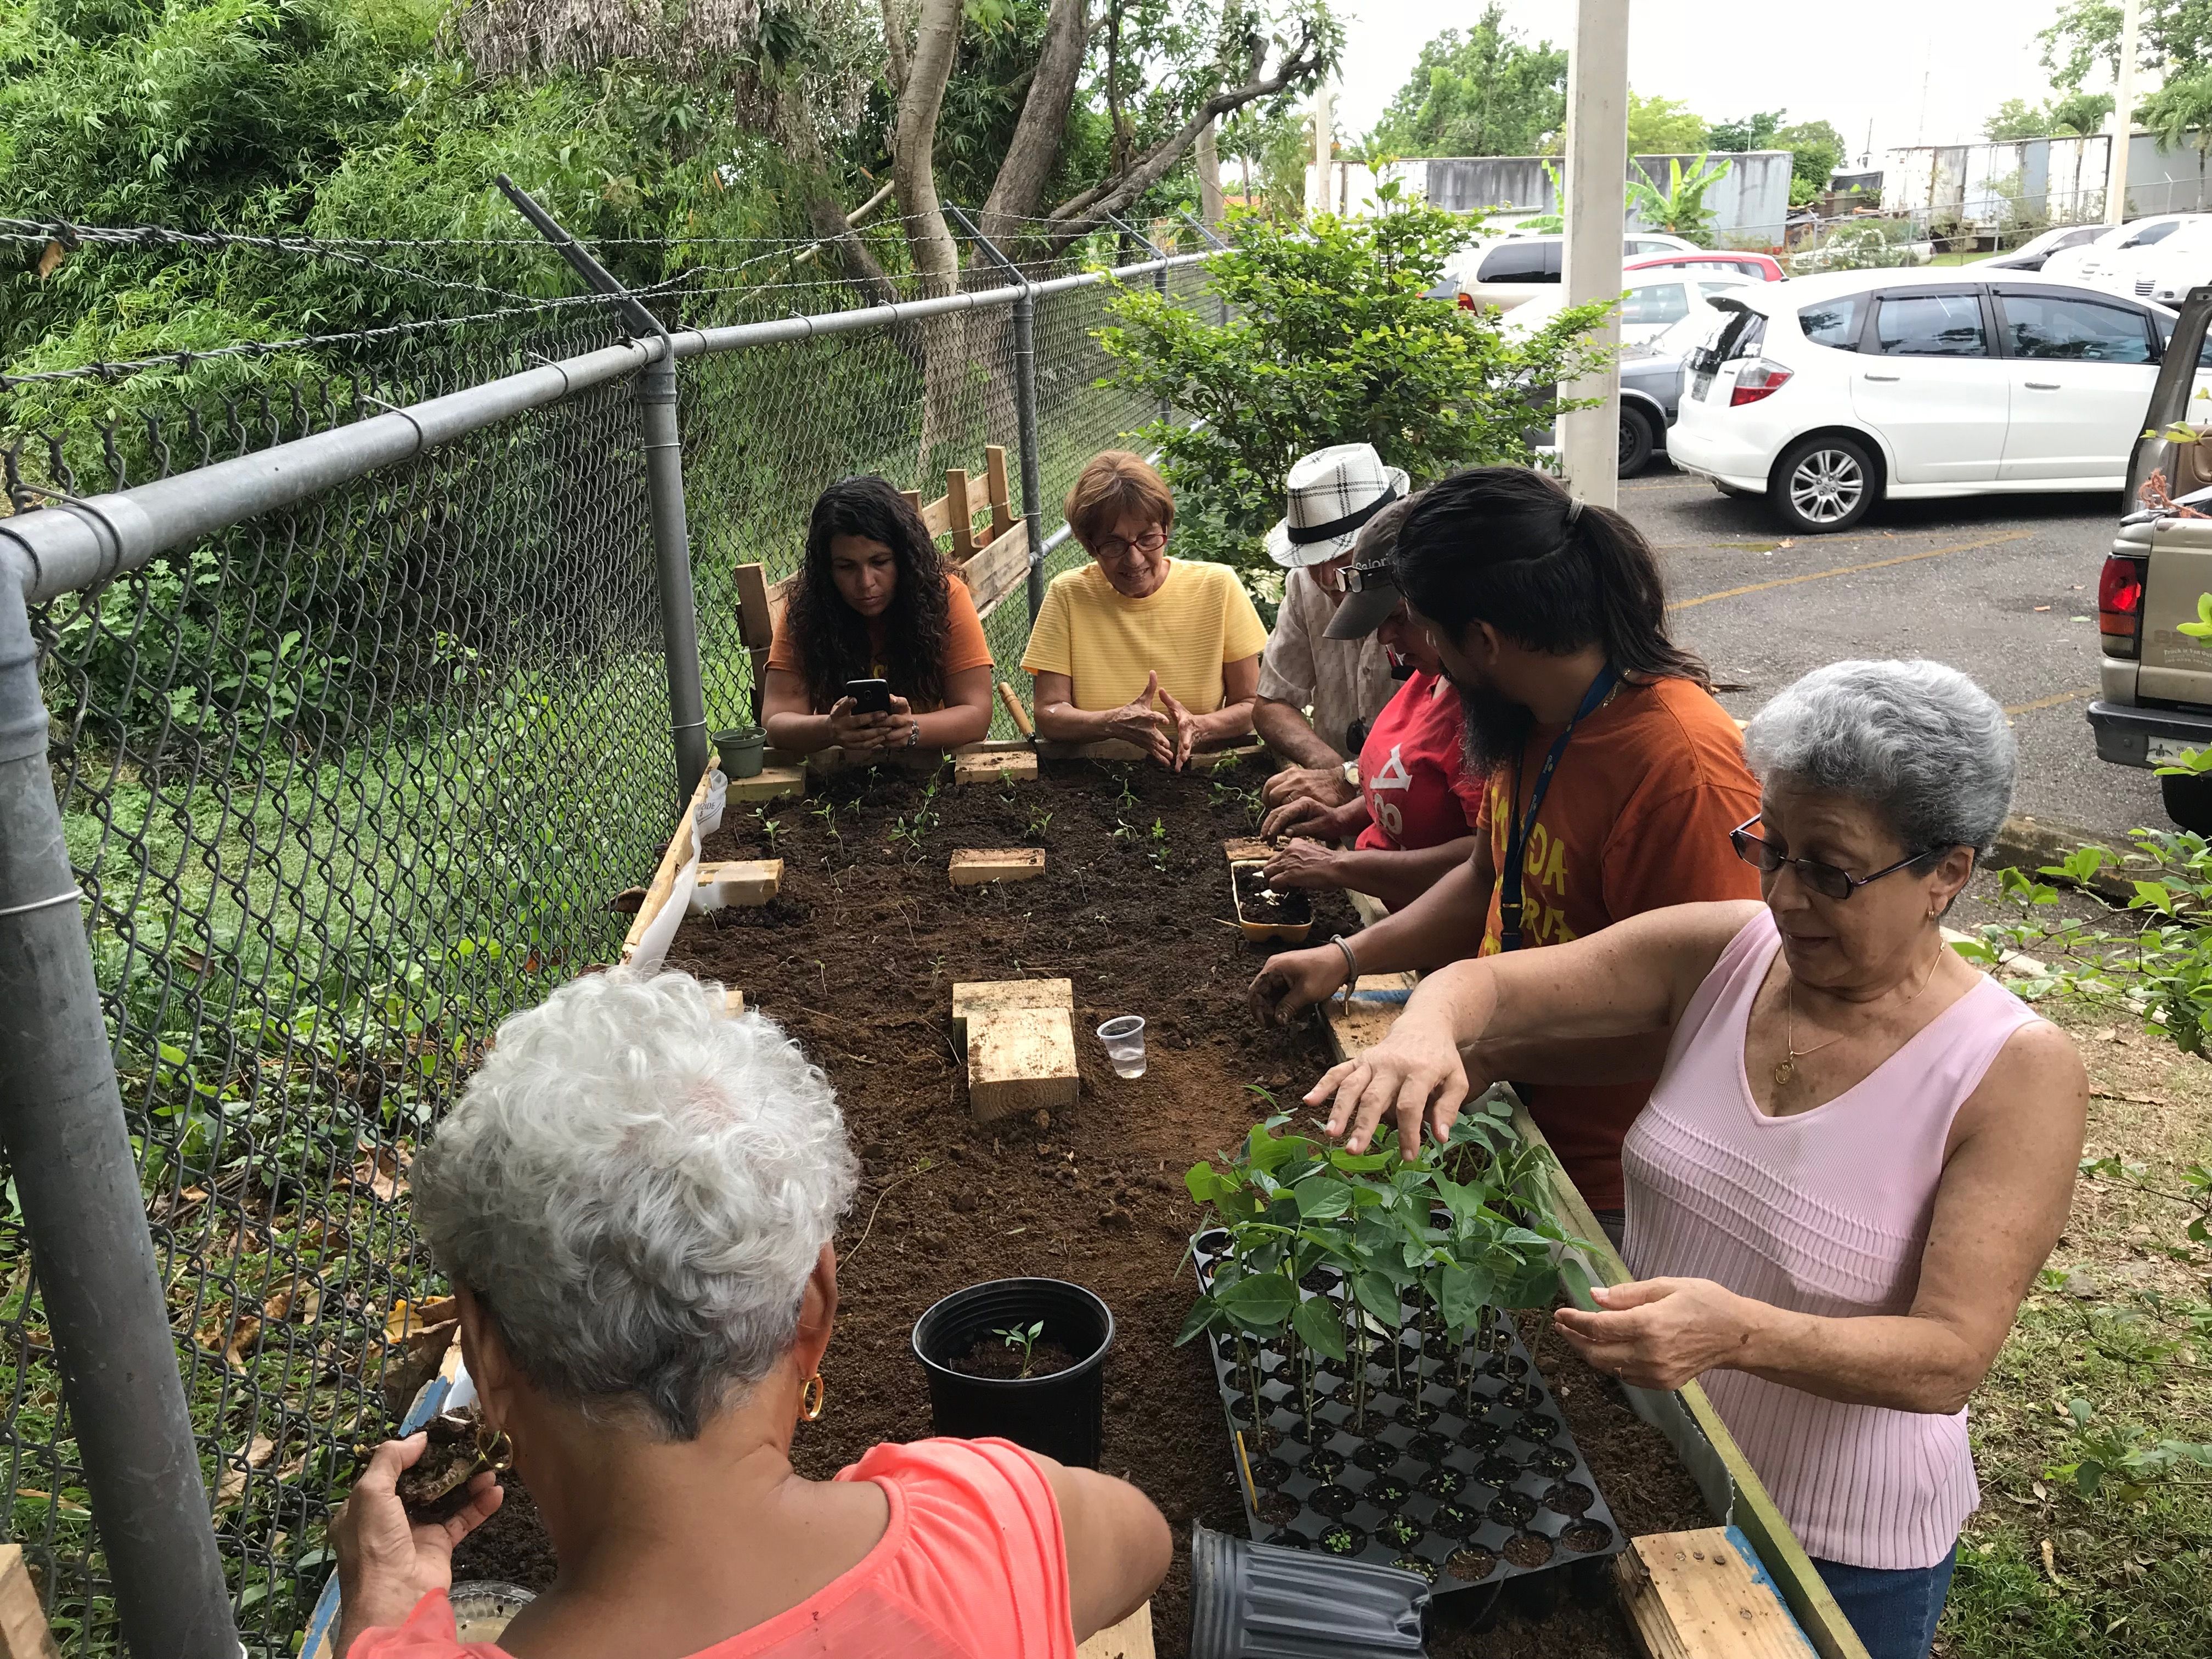 Brigada Solidaria del Oeste helps residents at the San Fernando Elderly Center in Mayagüez, PR, to plant vegetables behind their residential building. Image by Tomas Woodall Posada. United States, 2018.